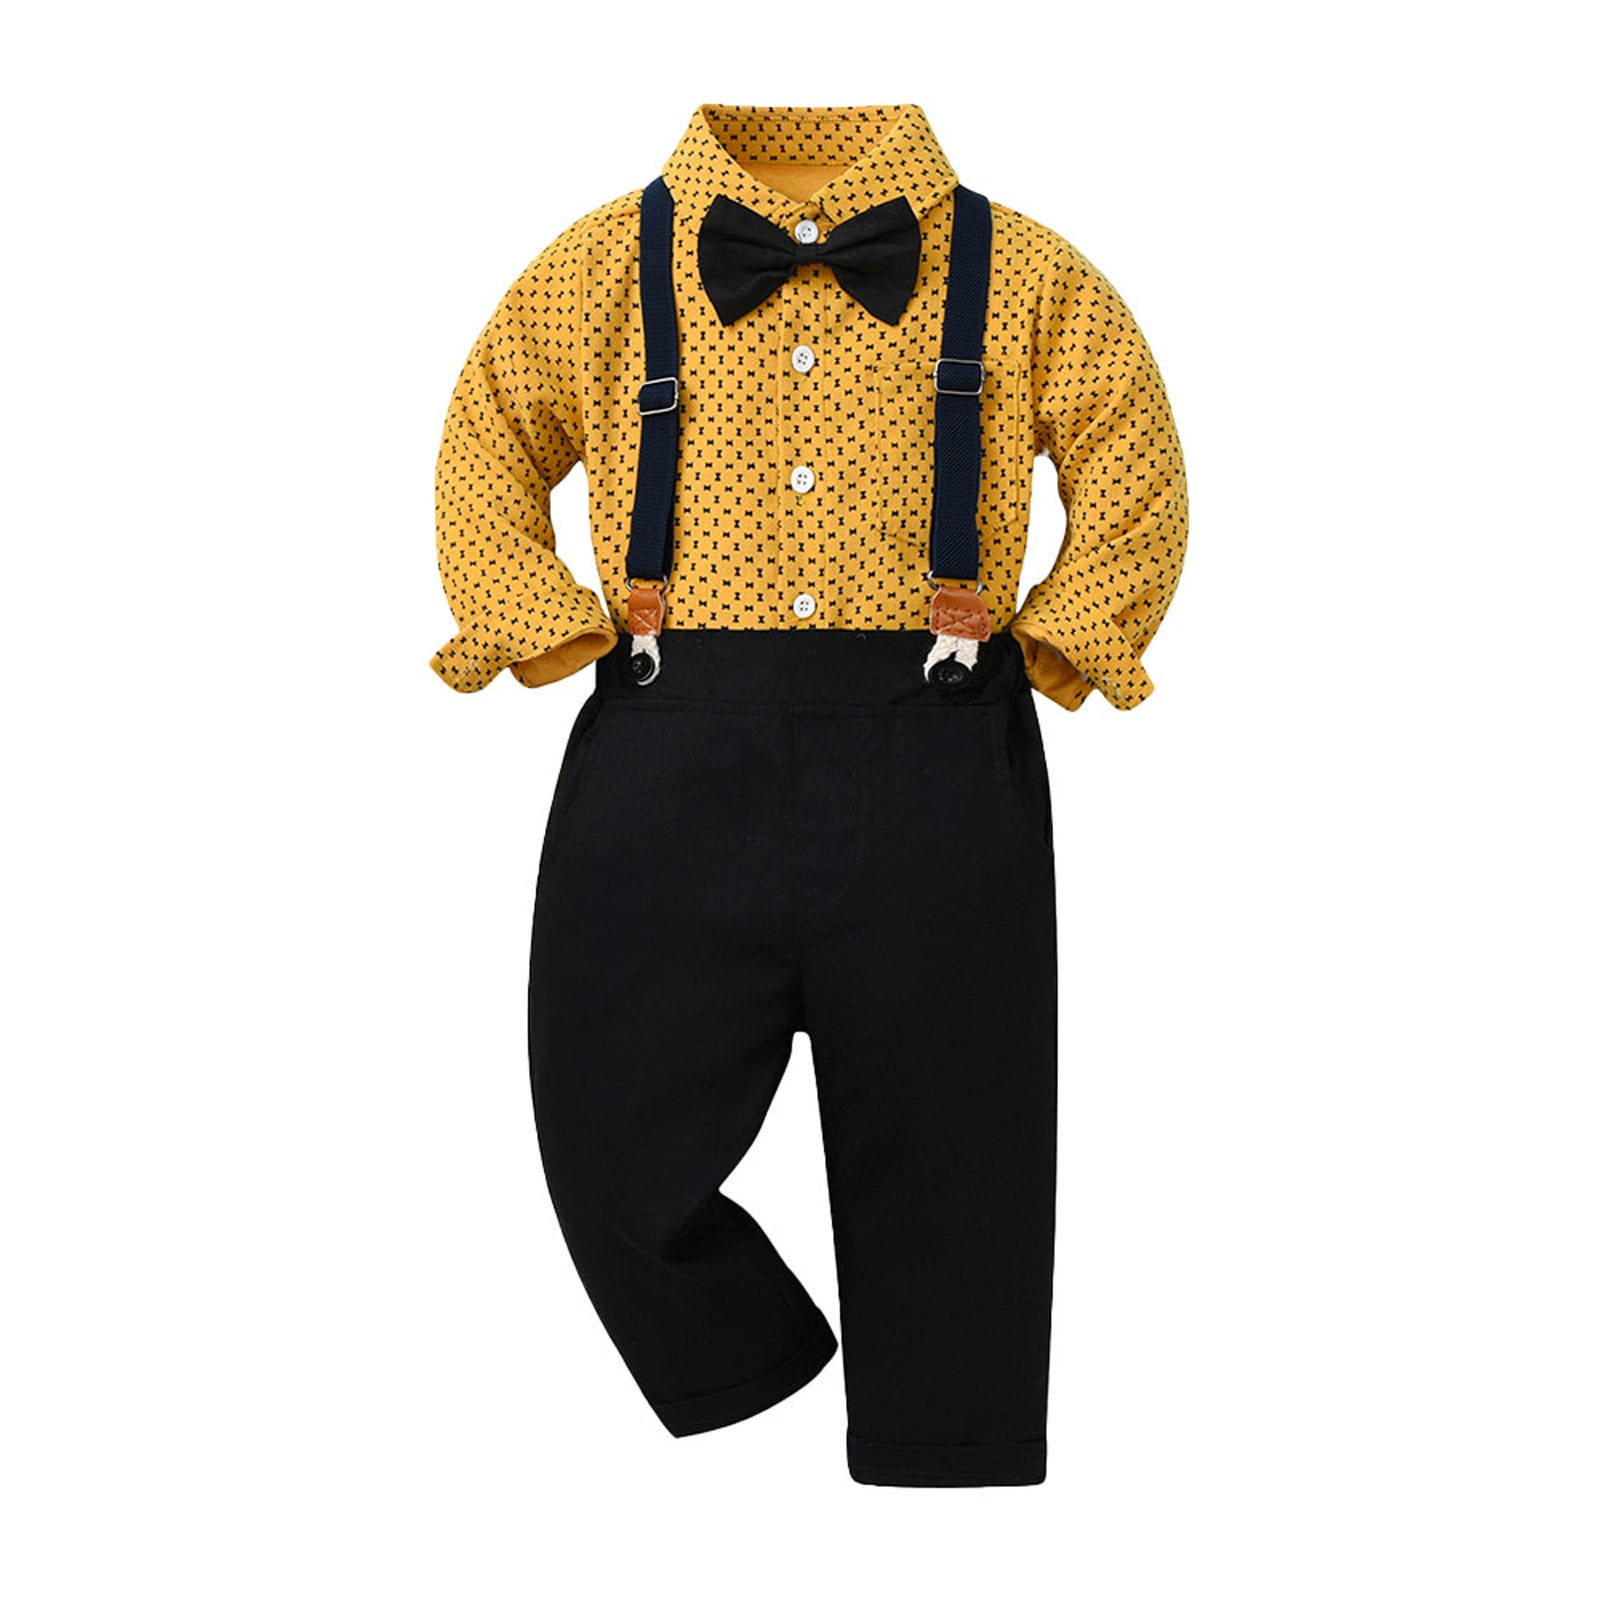 23 Color 3pc Set Bow Tie Boy Baby Toddler Kid Formal Suit Shirt